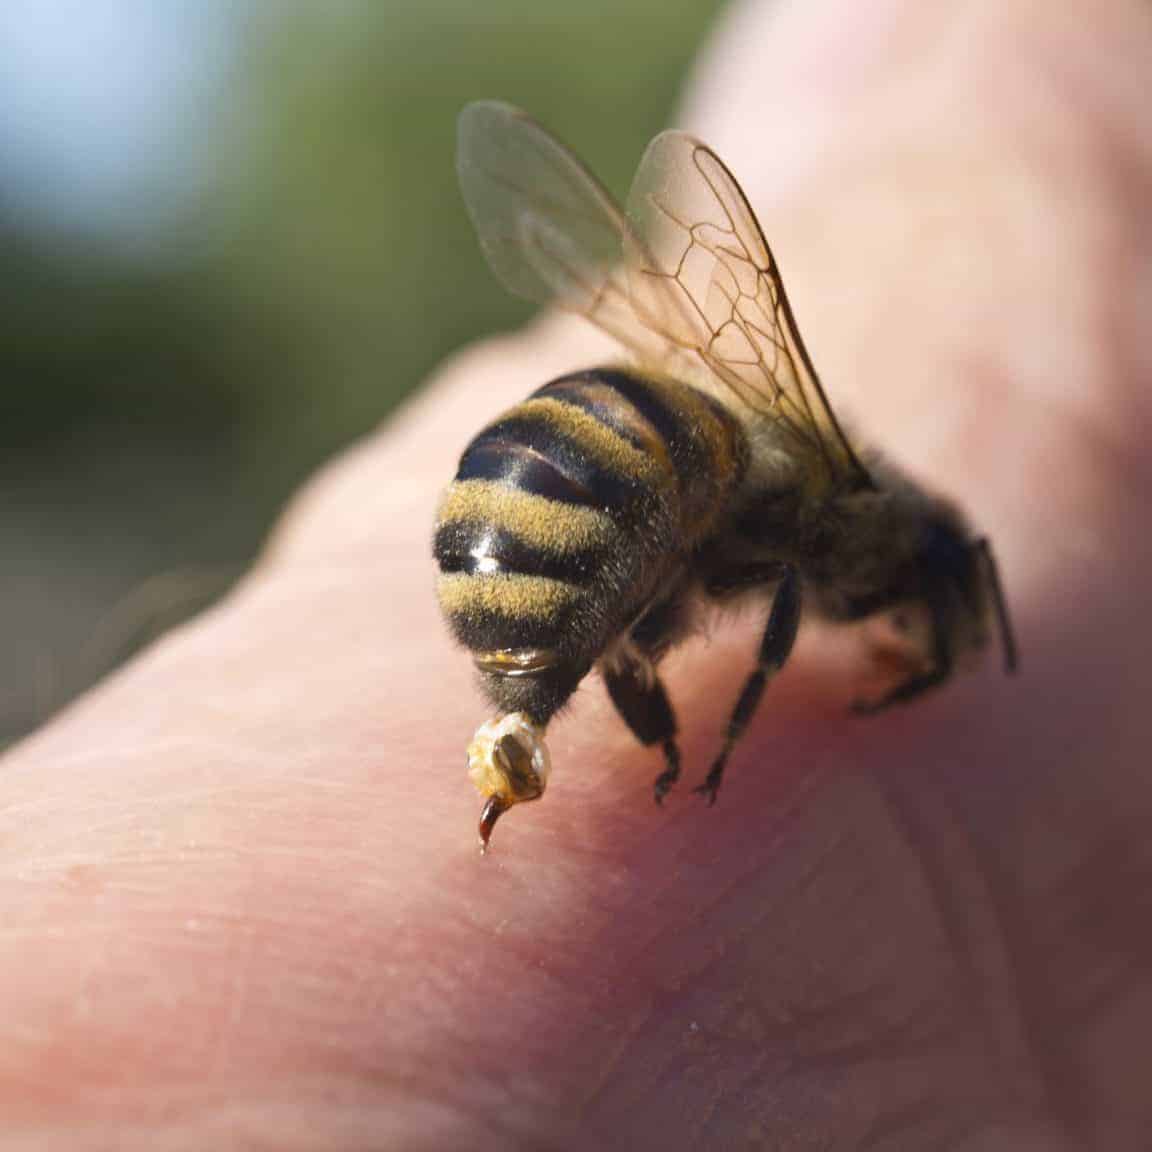 What Bees Sting You?